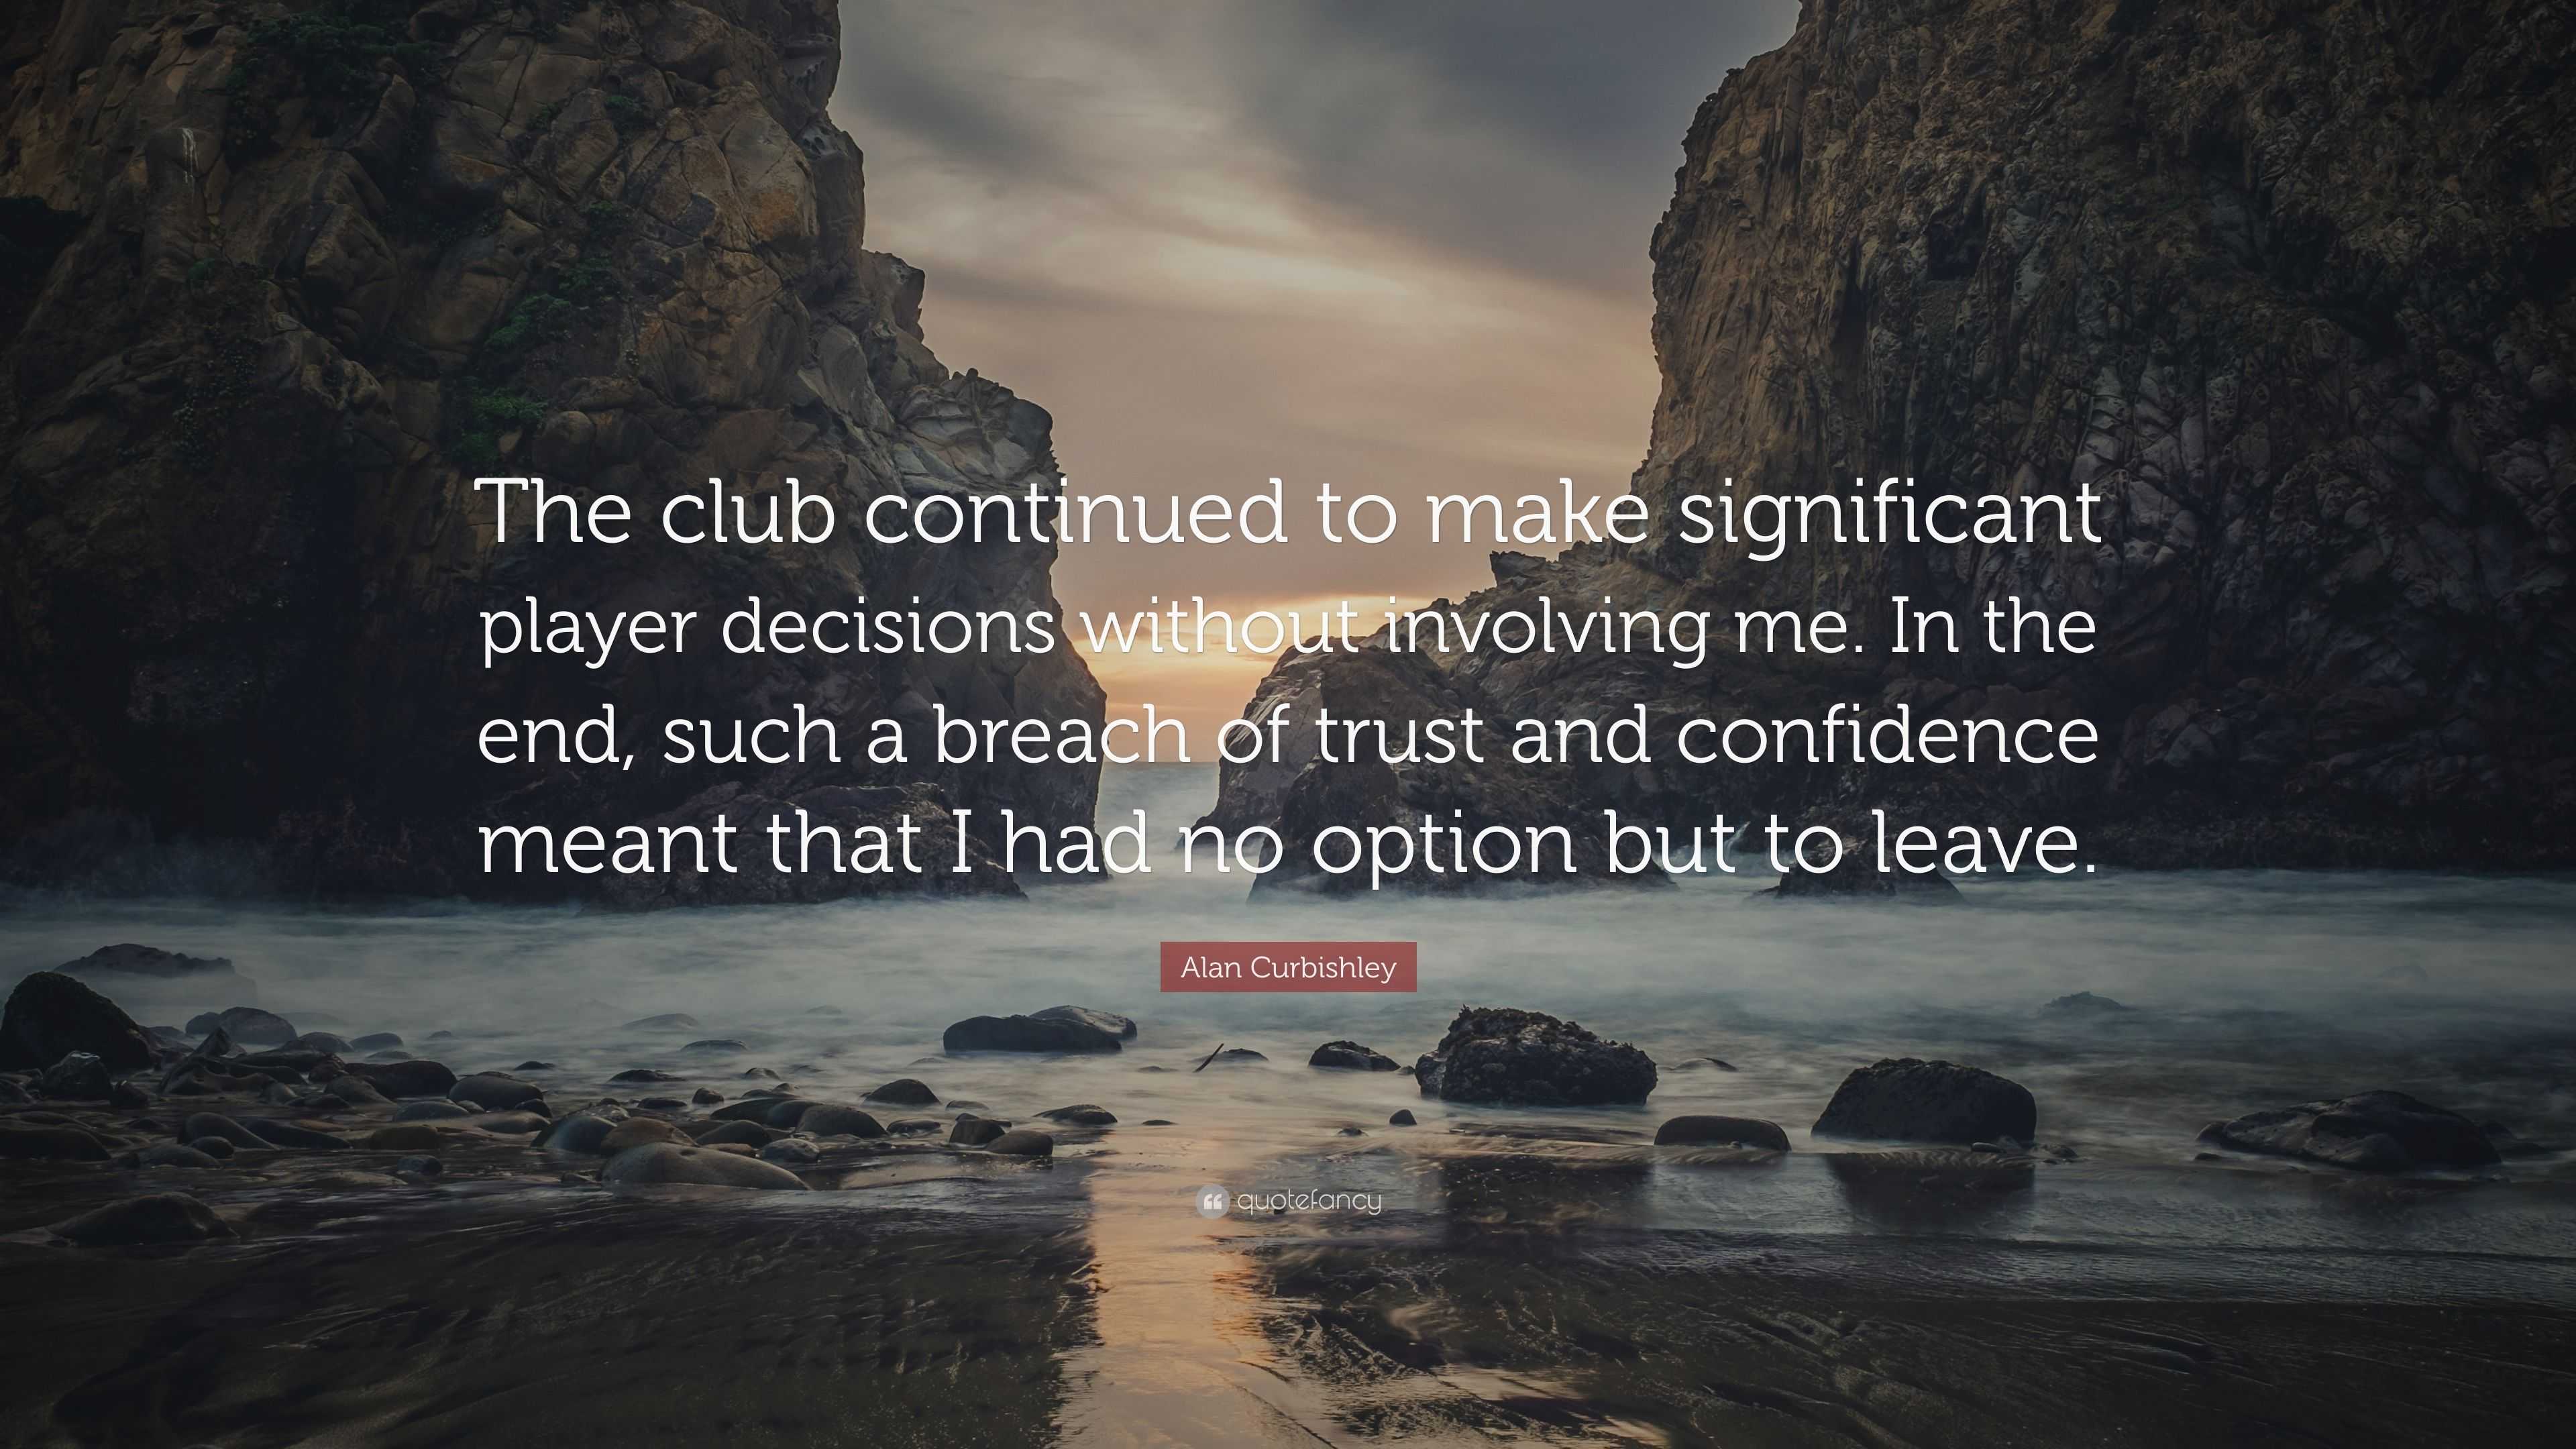 Alan Curbishley Quote: “The club continued to make significant player ...